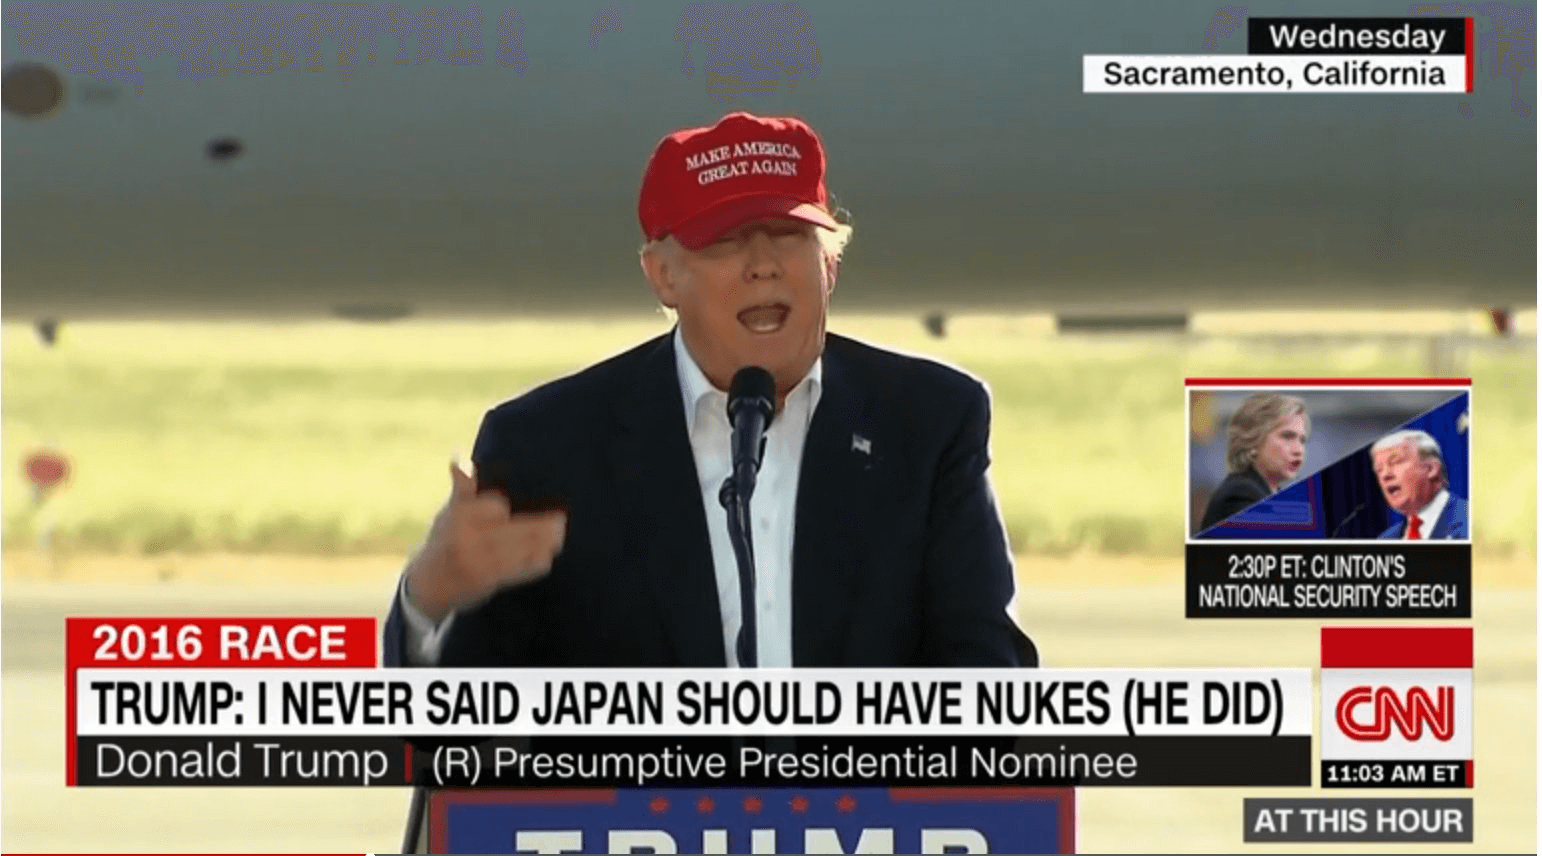 What is a Chyron News Chyron Broadcast Example from CNN